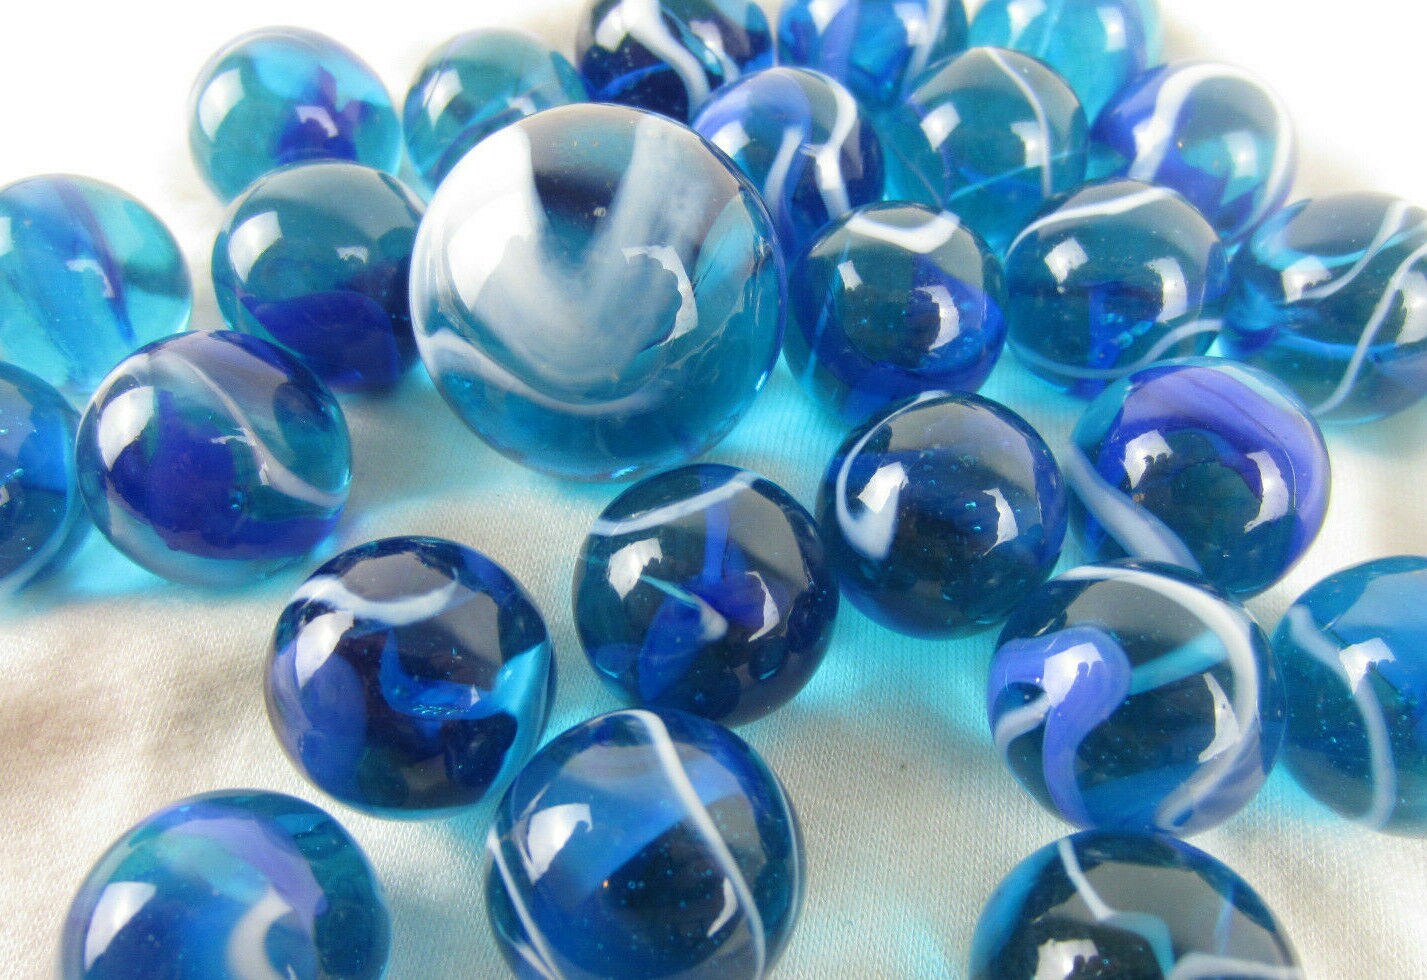 25 Glass Marbles BLUE JAY game pack vtg style Clear Translucent Shooter Swirl